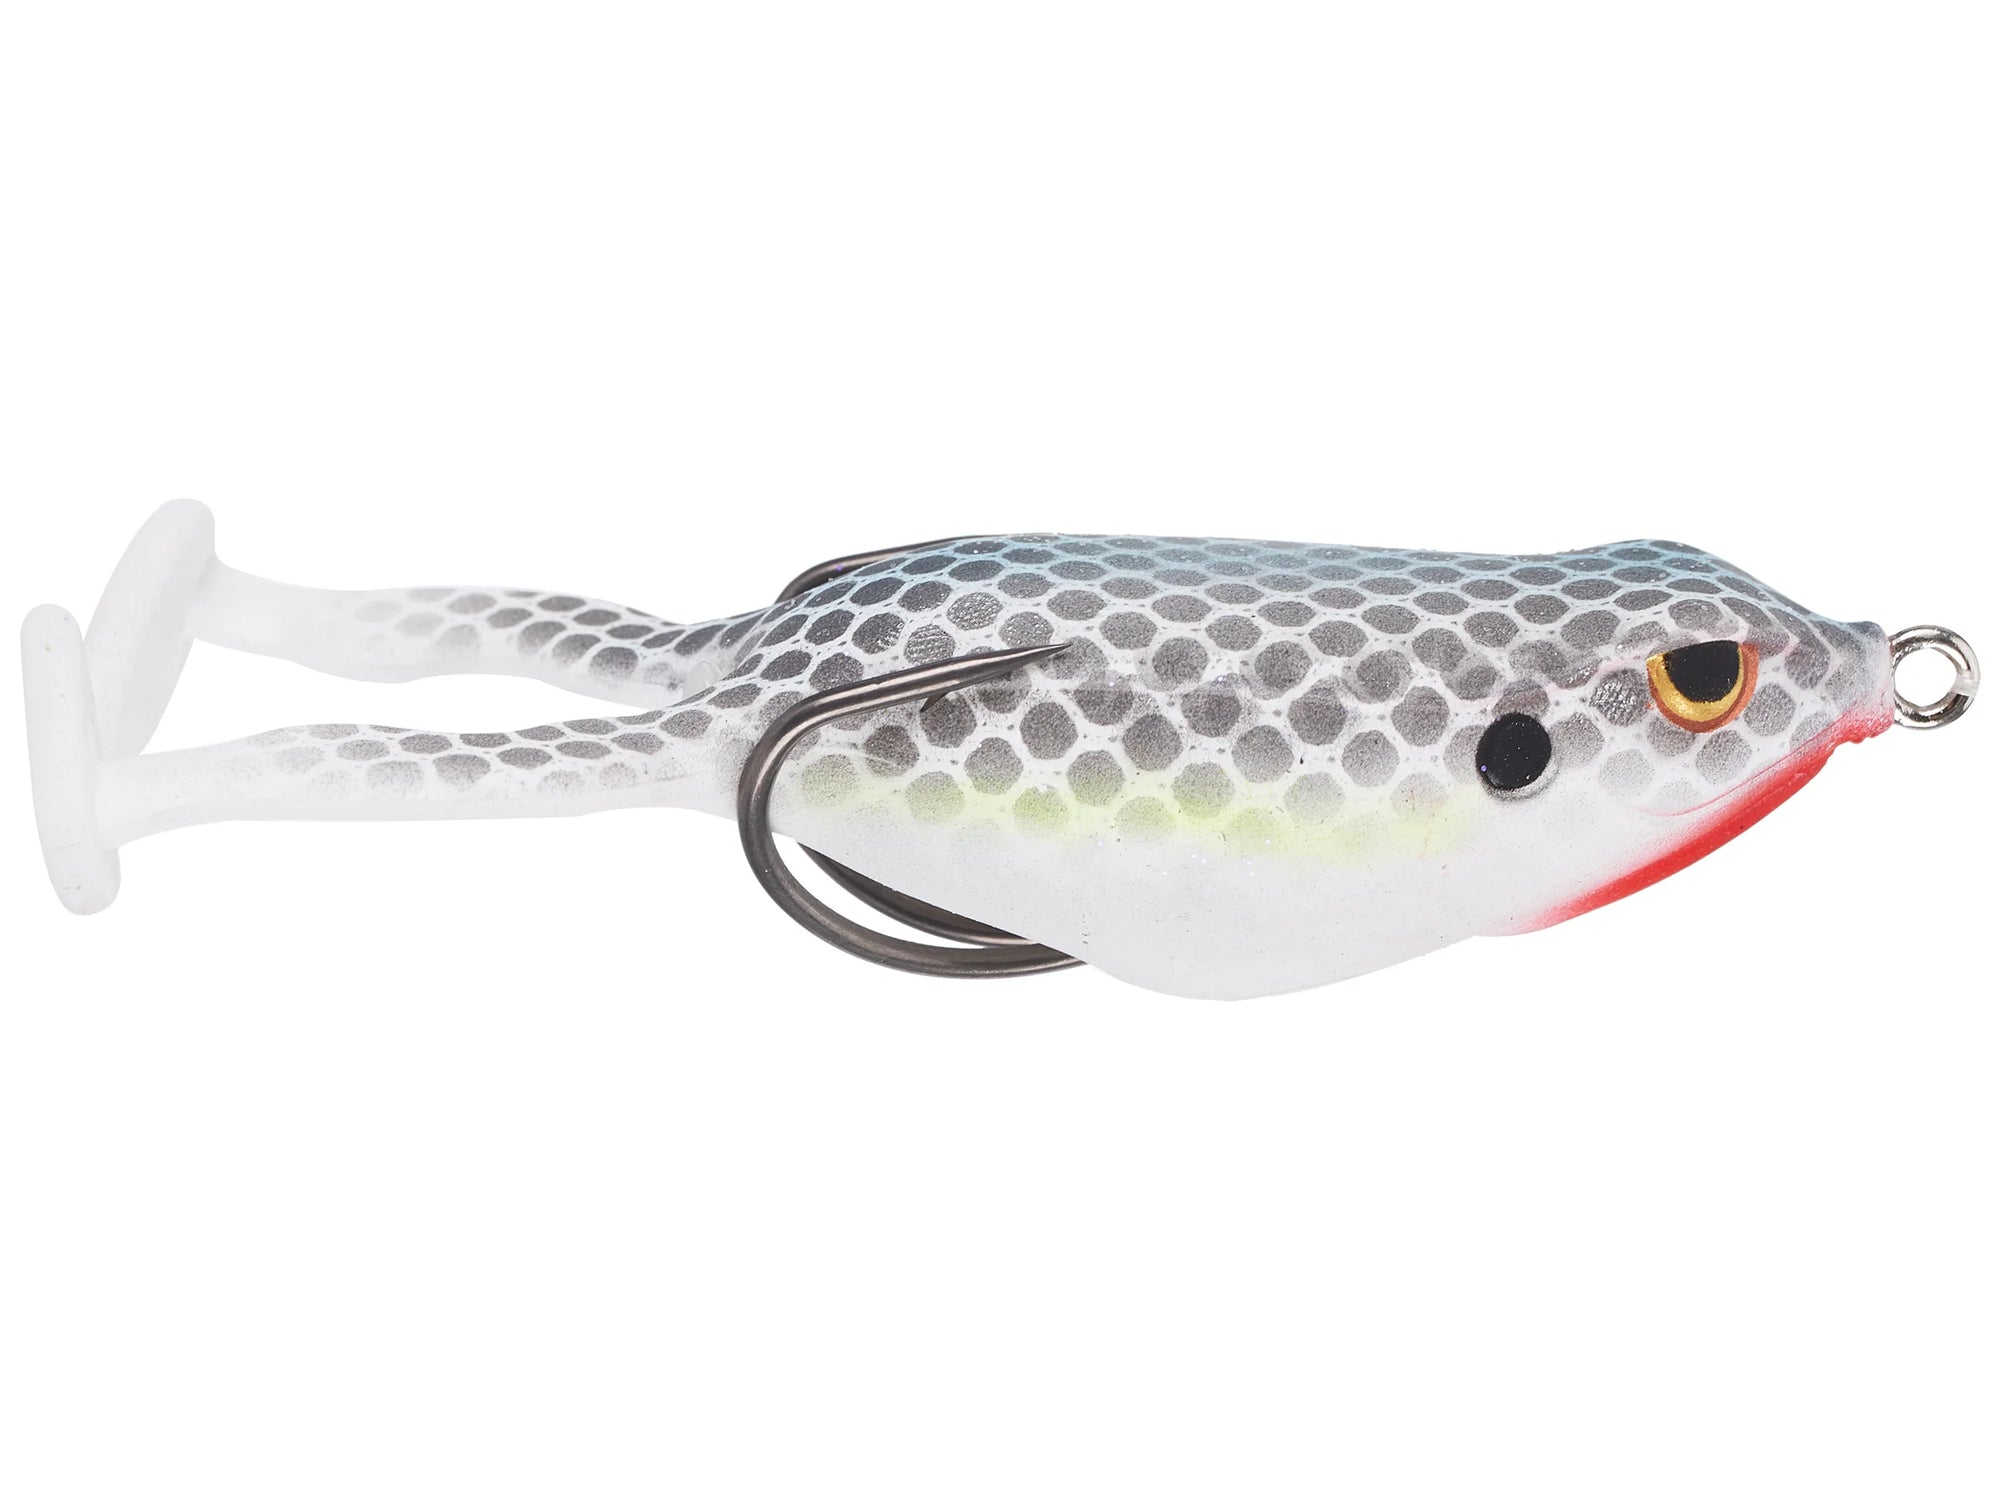 Spro Flappin Frog 65 - American Legacy Fishing, G Loomis Superstore